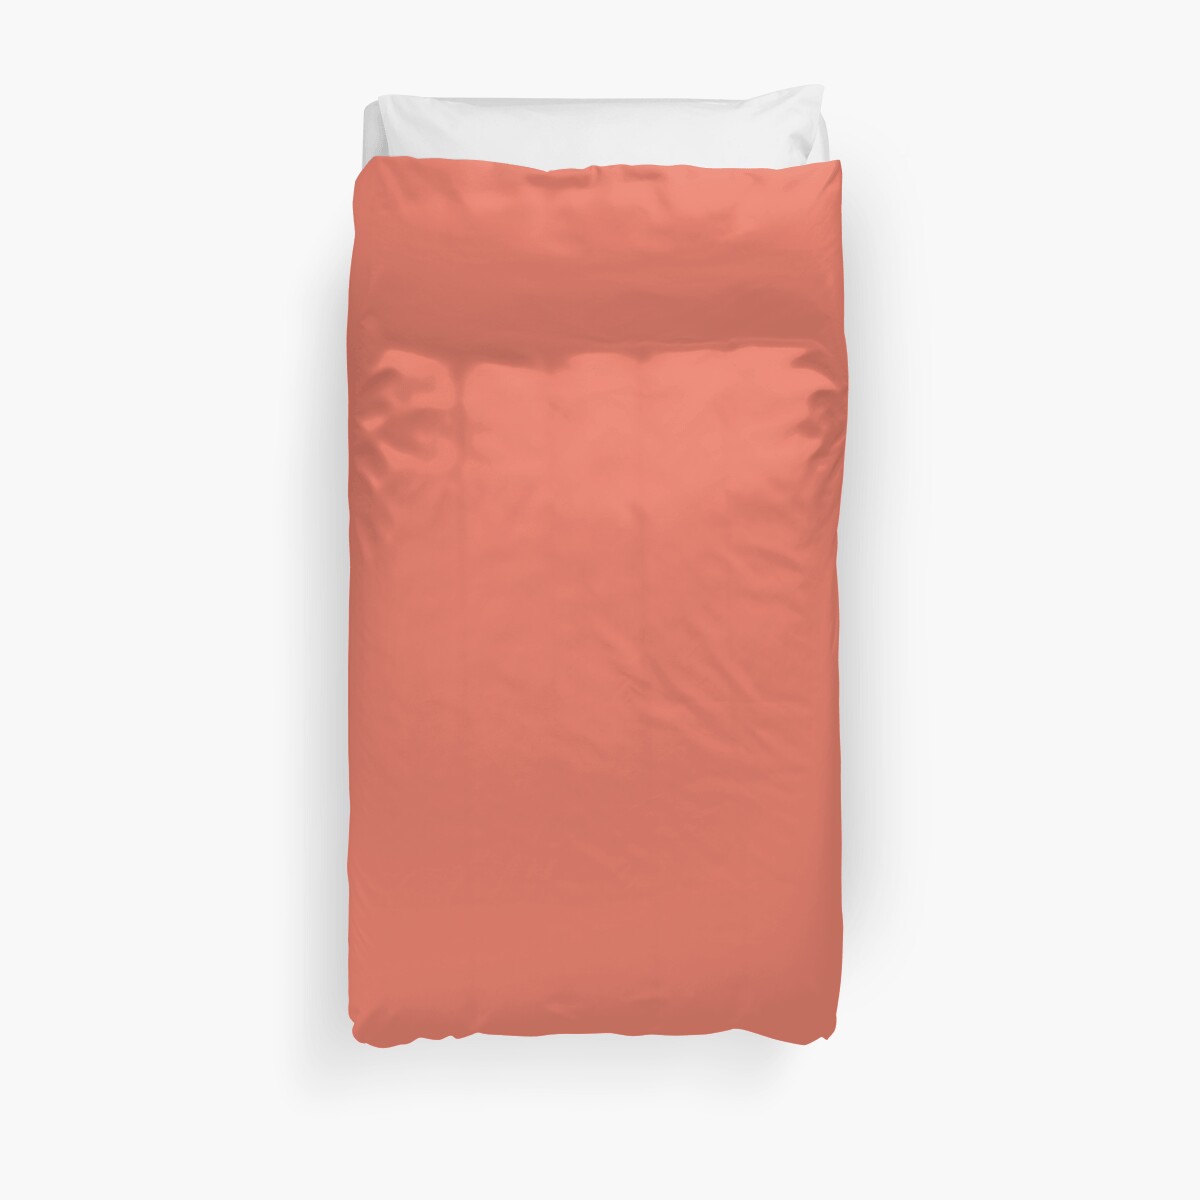 Girly Chic Trendy Summer Color Orange Peach Coral Pink Duvet